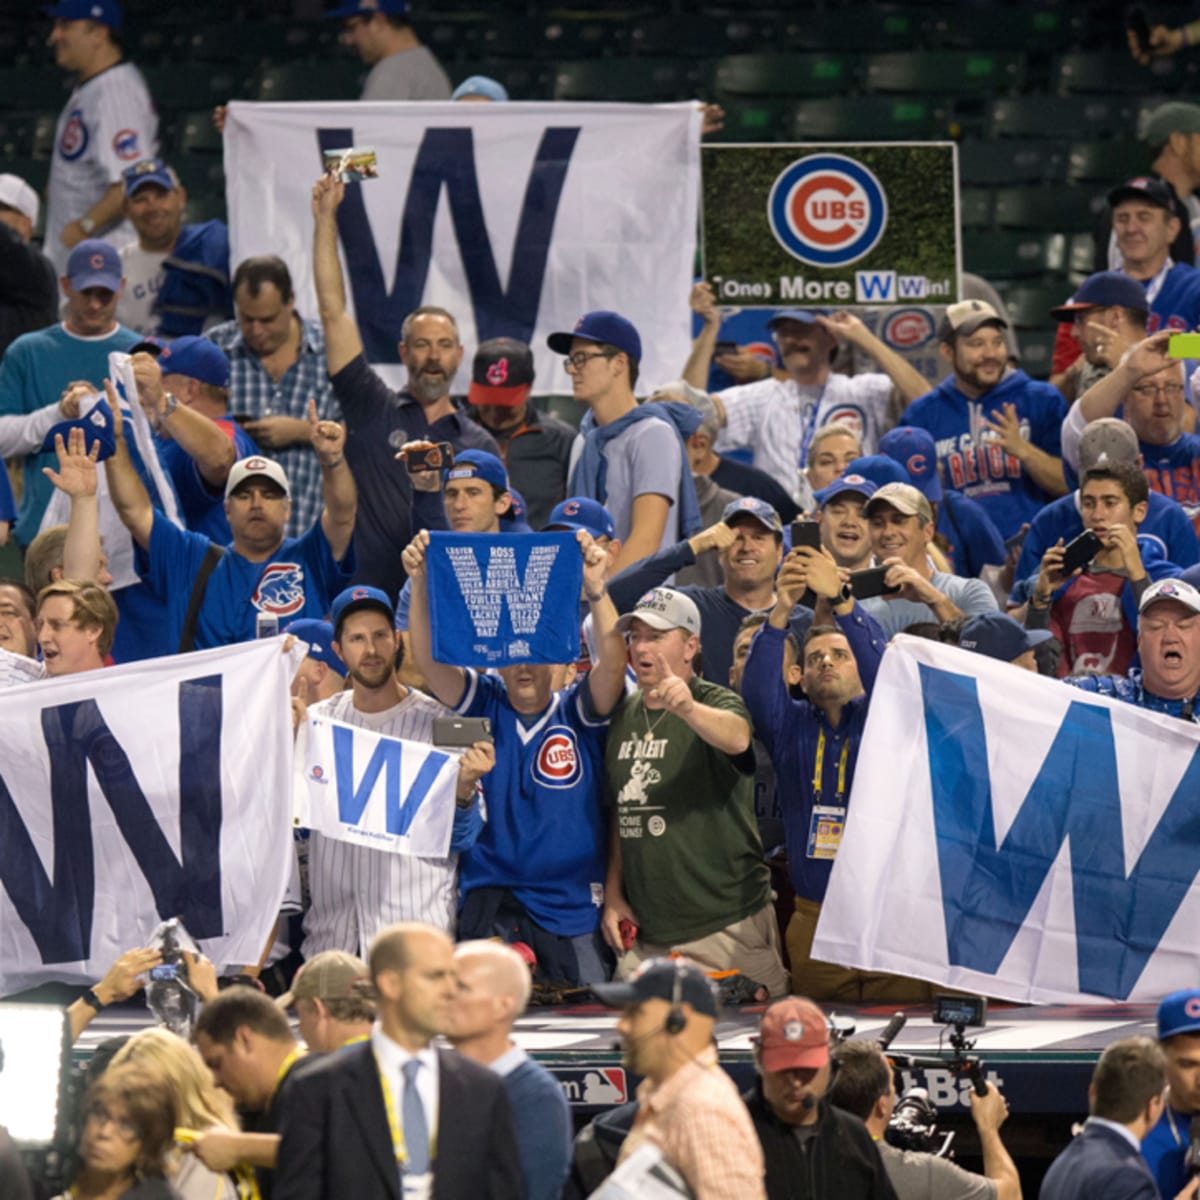 Video Chicago Cubs Win World Series for 1st Time in 108 Years